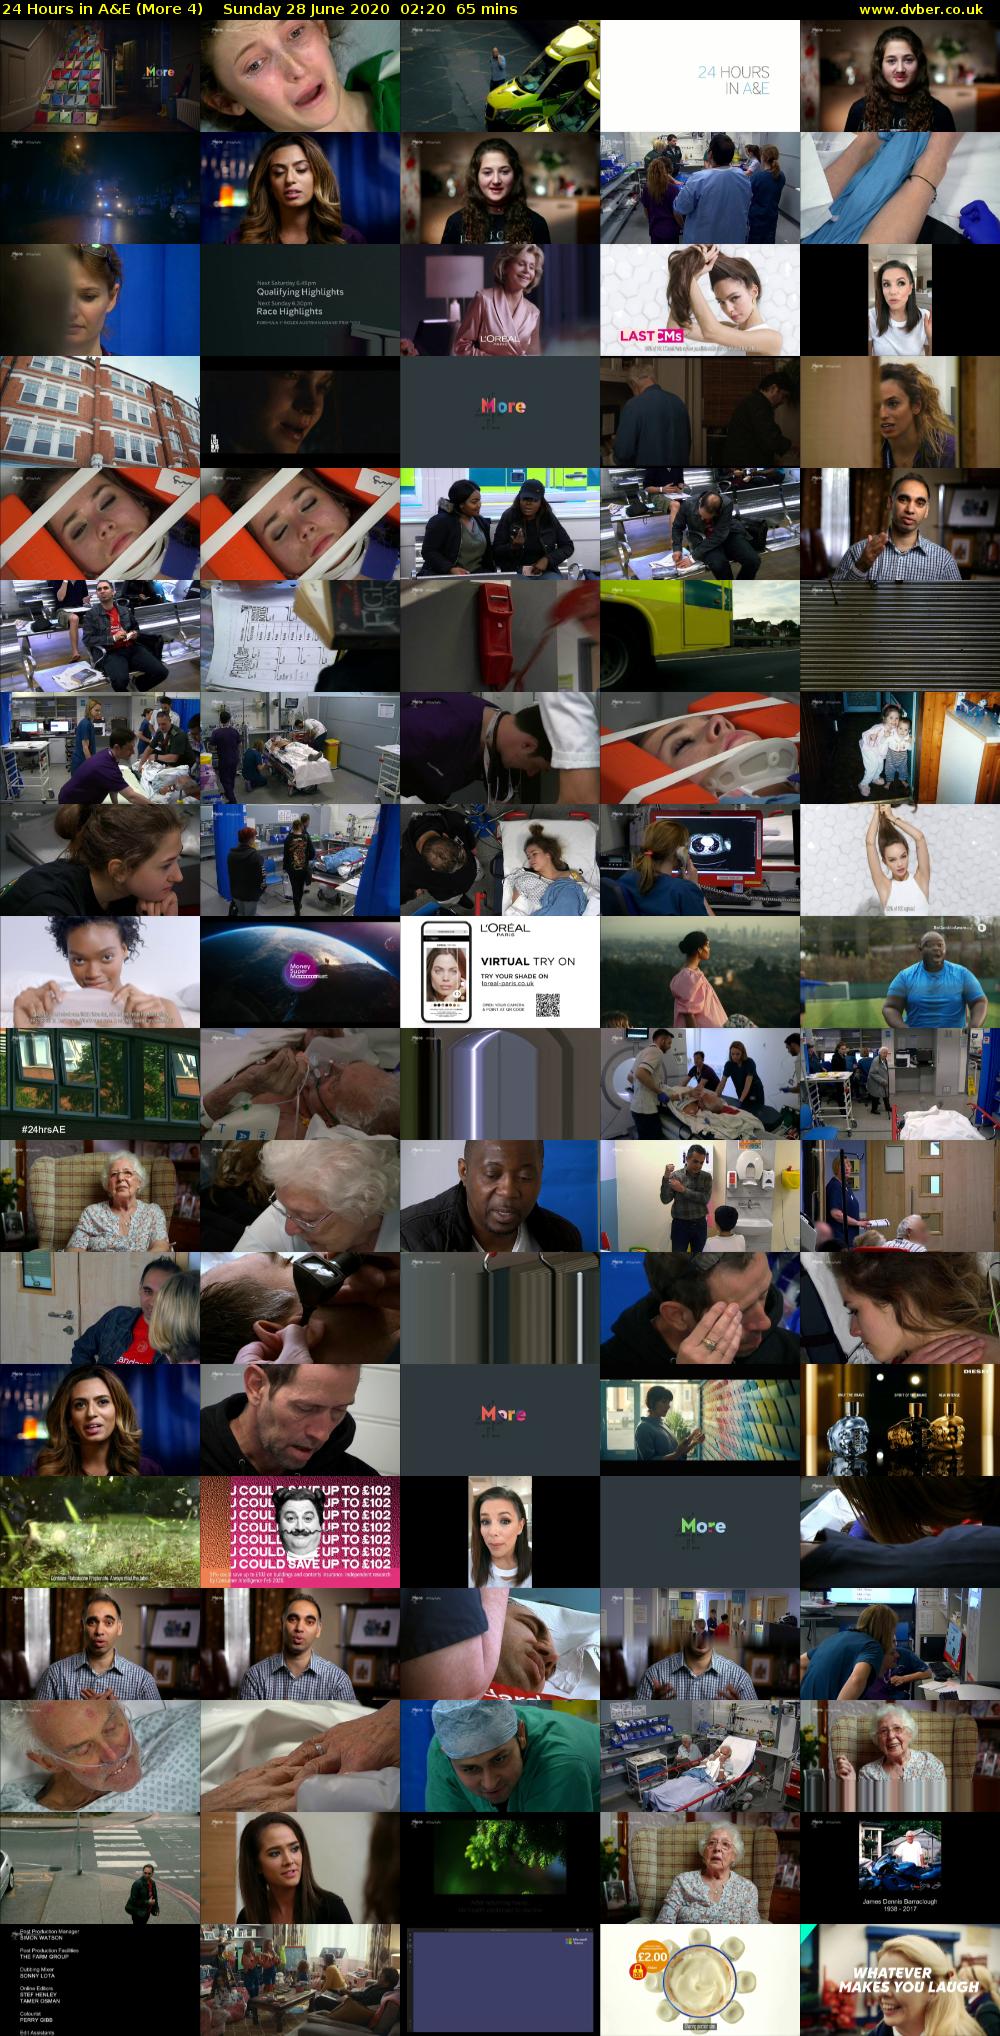 24 Hours in A&E (More 4) Sunday 28 June 2020 02:20 - 03:25